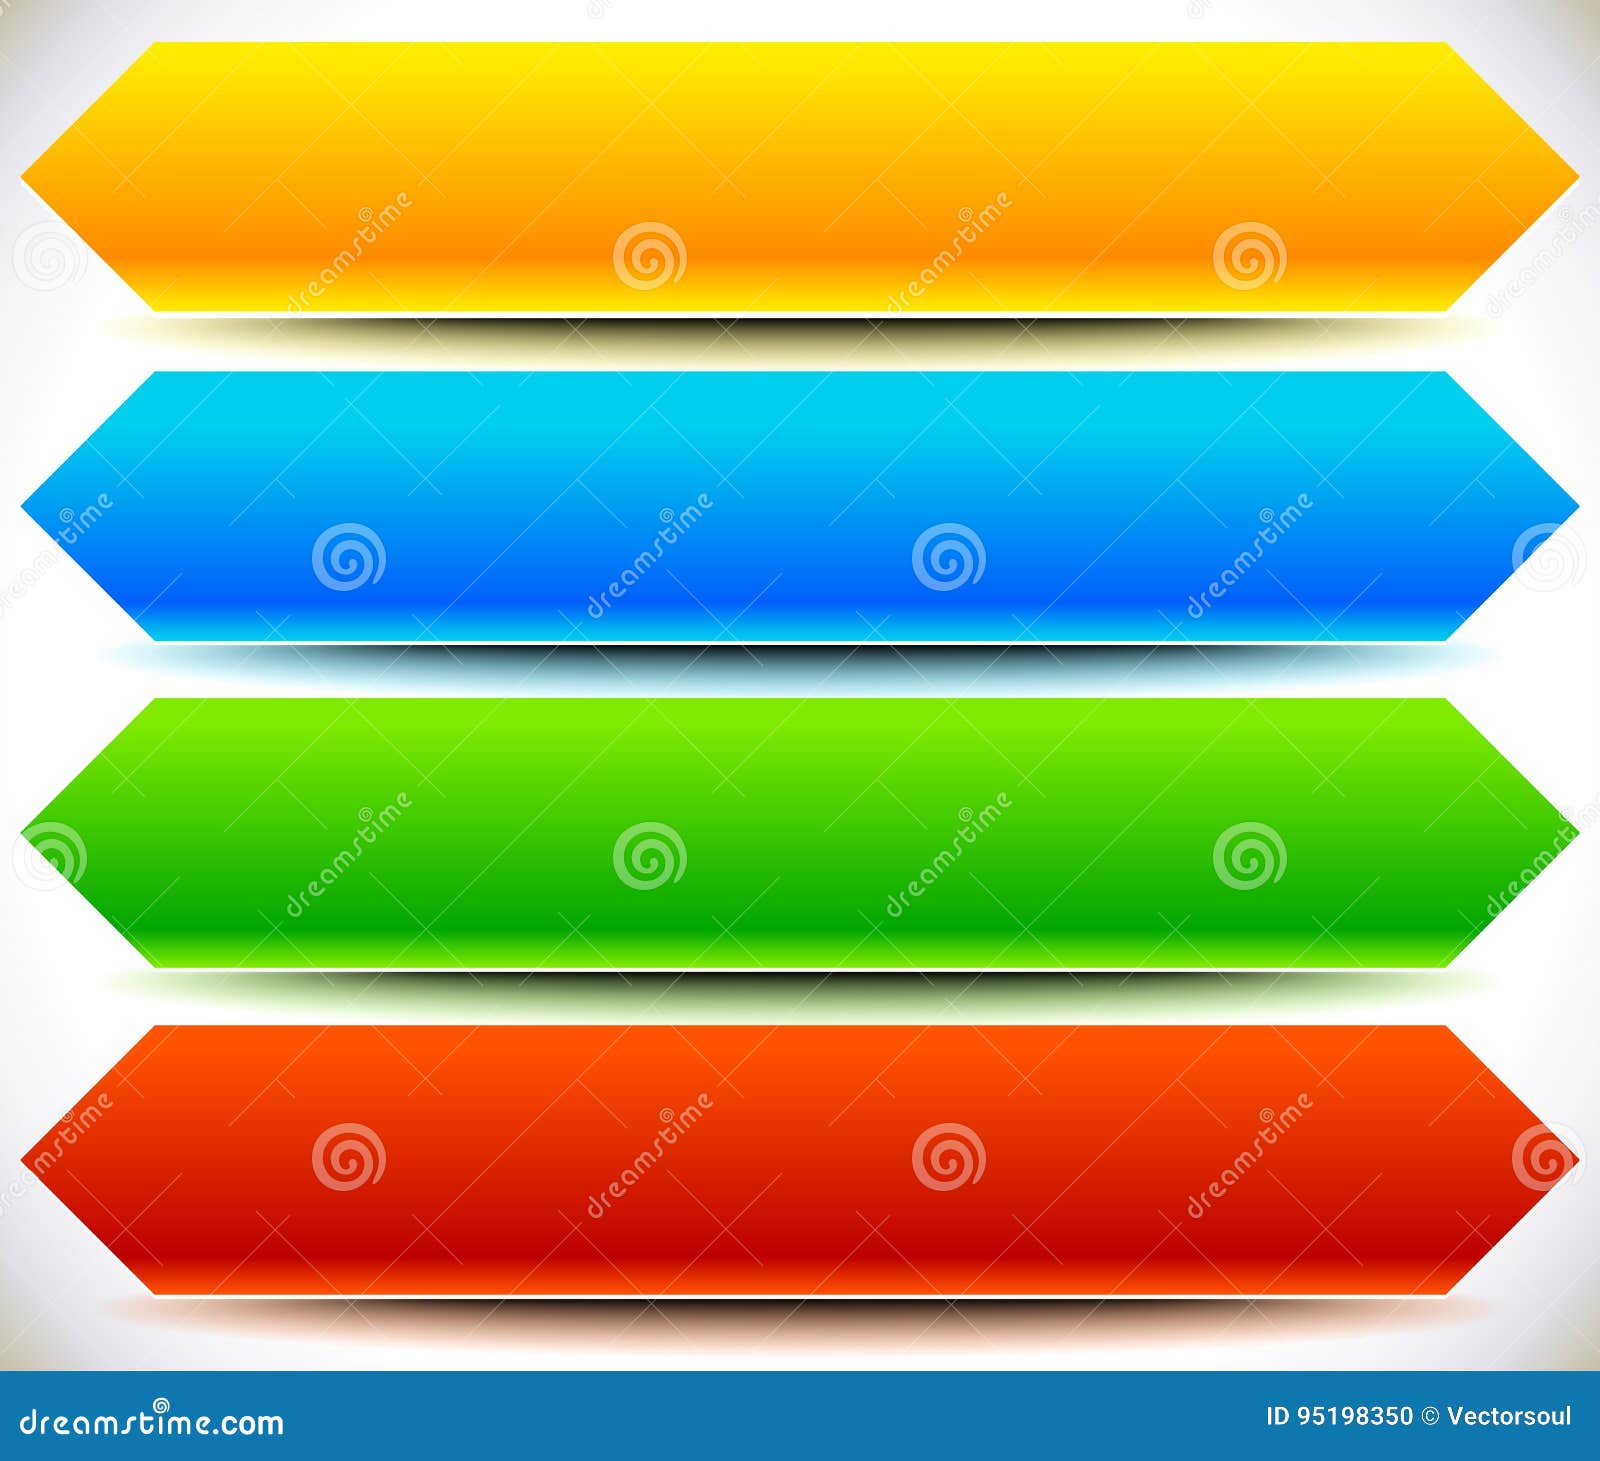 Button, Banner Shapes, Backgrounds. Abstract Tags, Labels Stock Vector ...